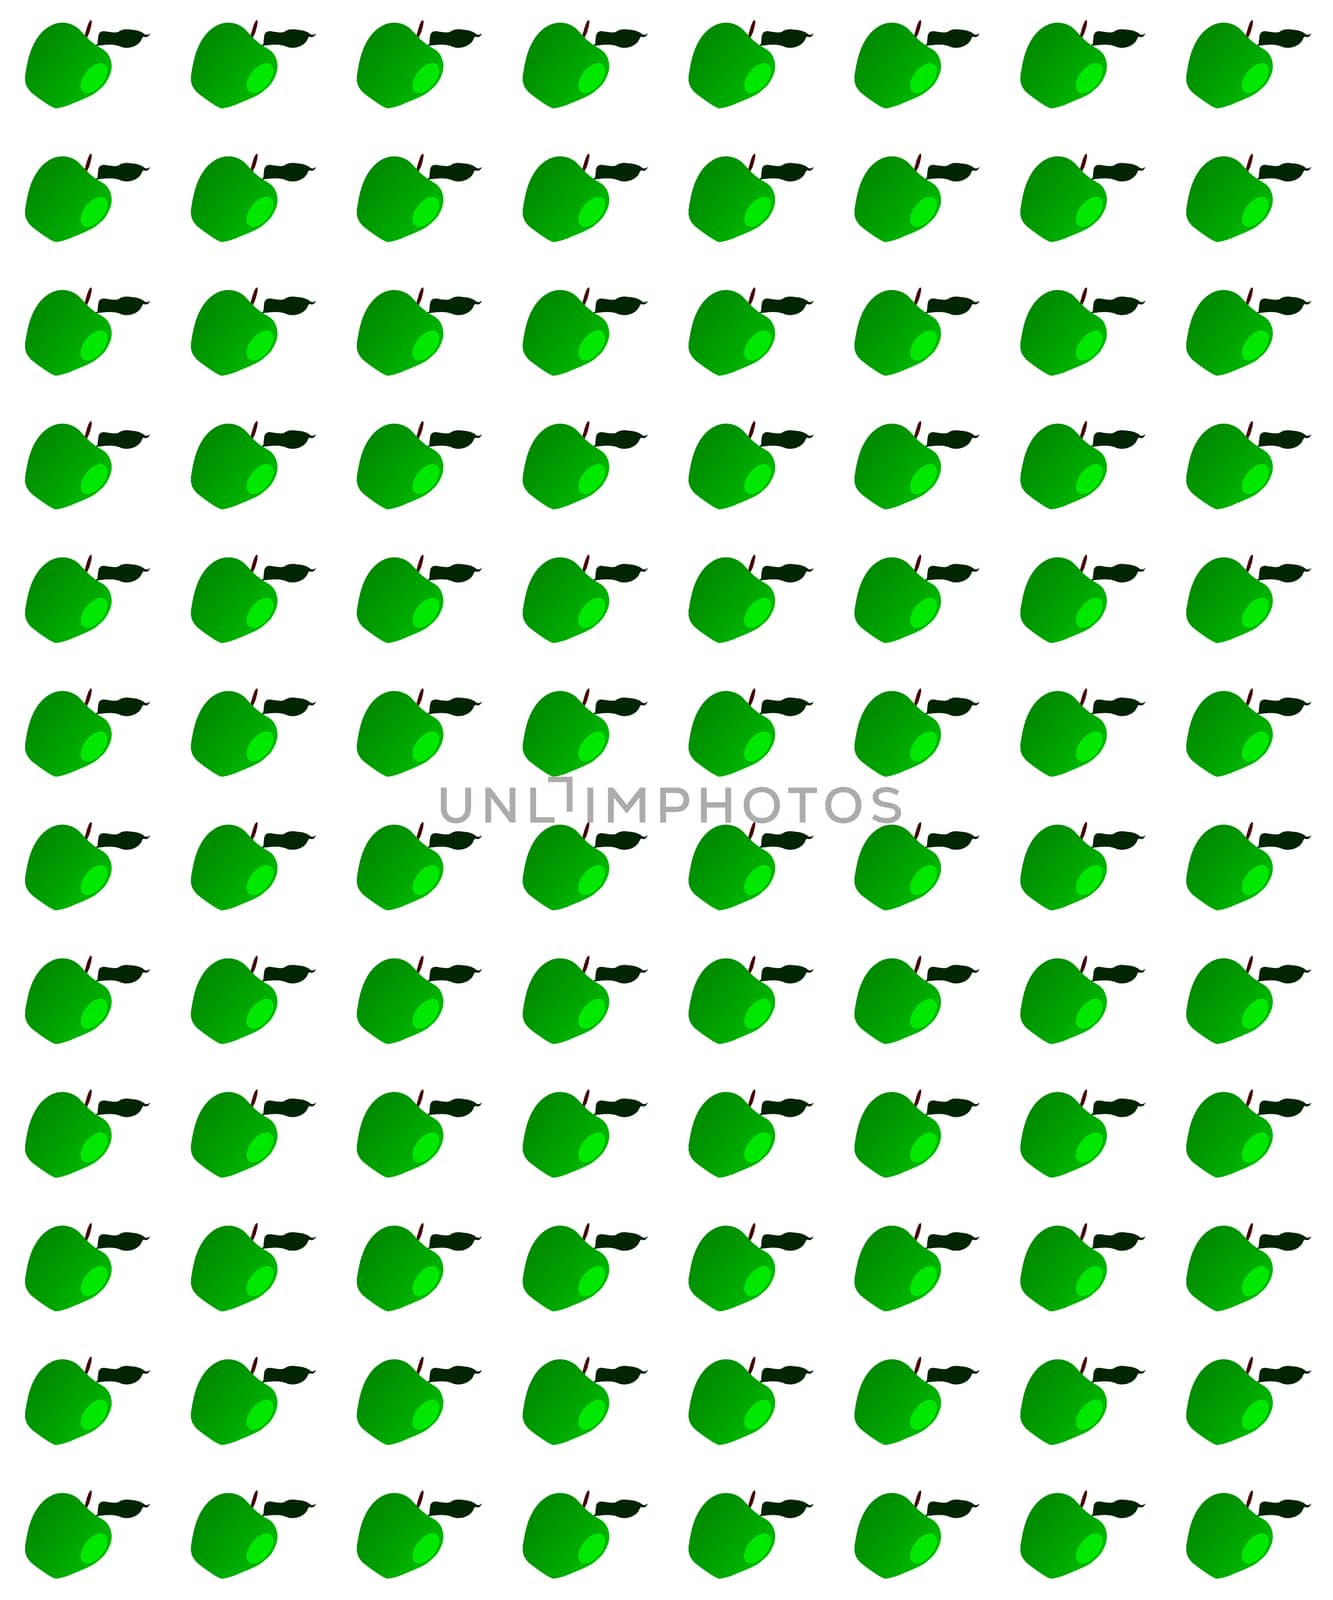 A page of green apples with stalks and leaves isolated on a white background